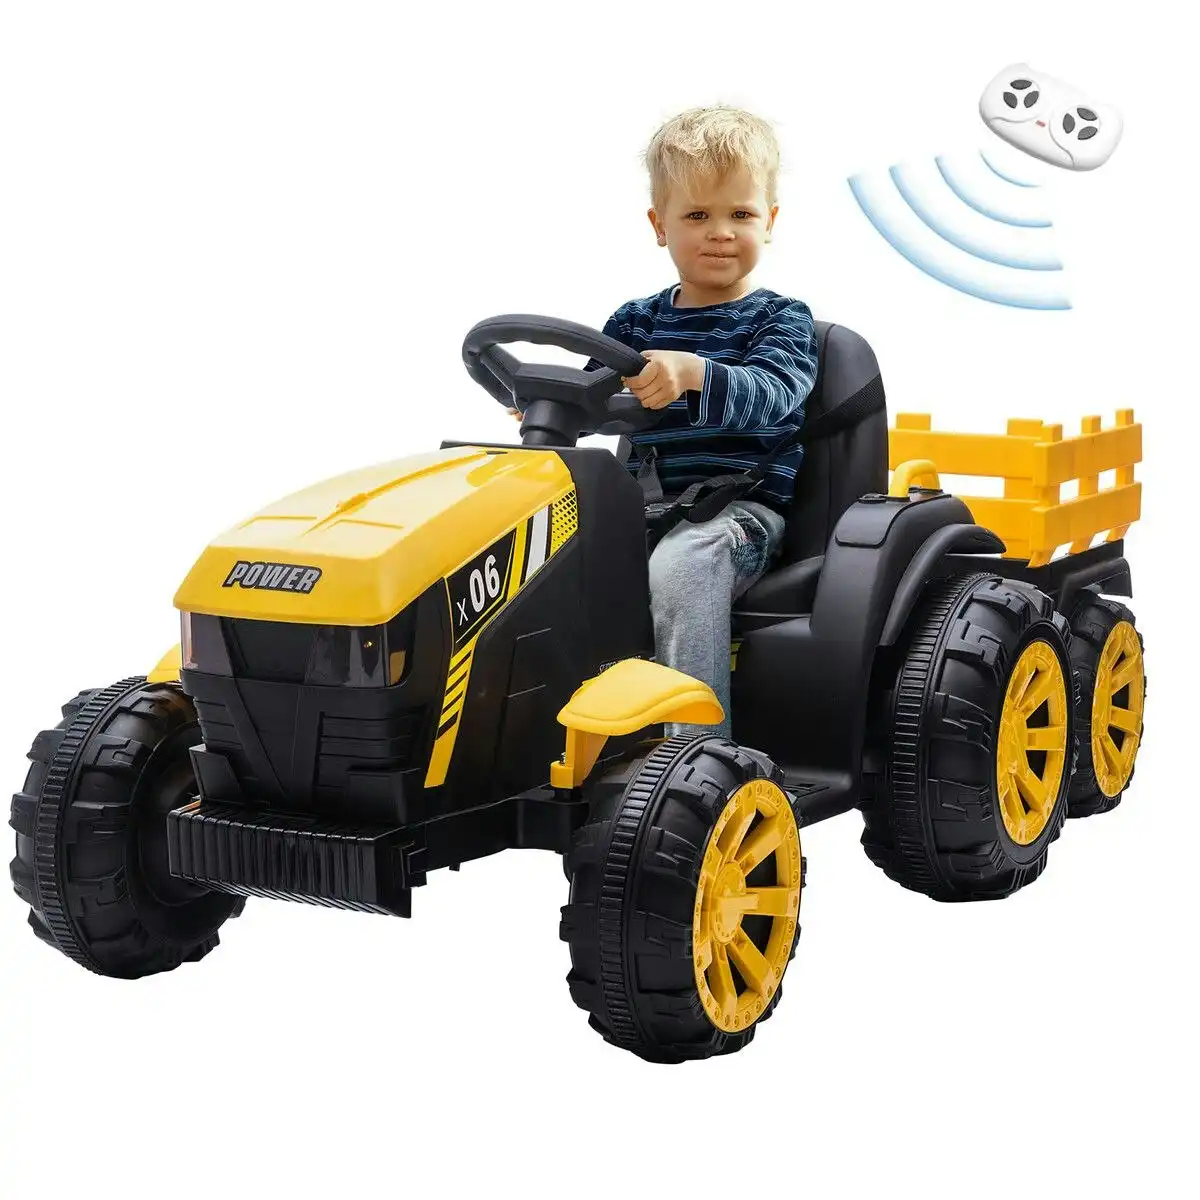 Kidbot Kids Ride on Tractor Remote Control 12V Battery Electric Car Toy Vehicle Trailer MP3 Player Safety Belt LED Light Yellow